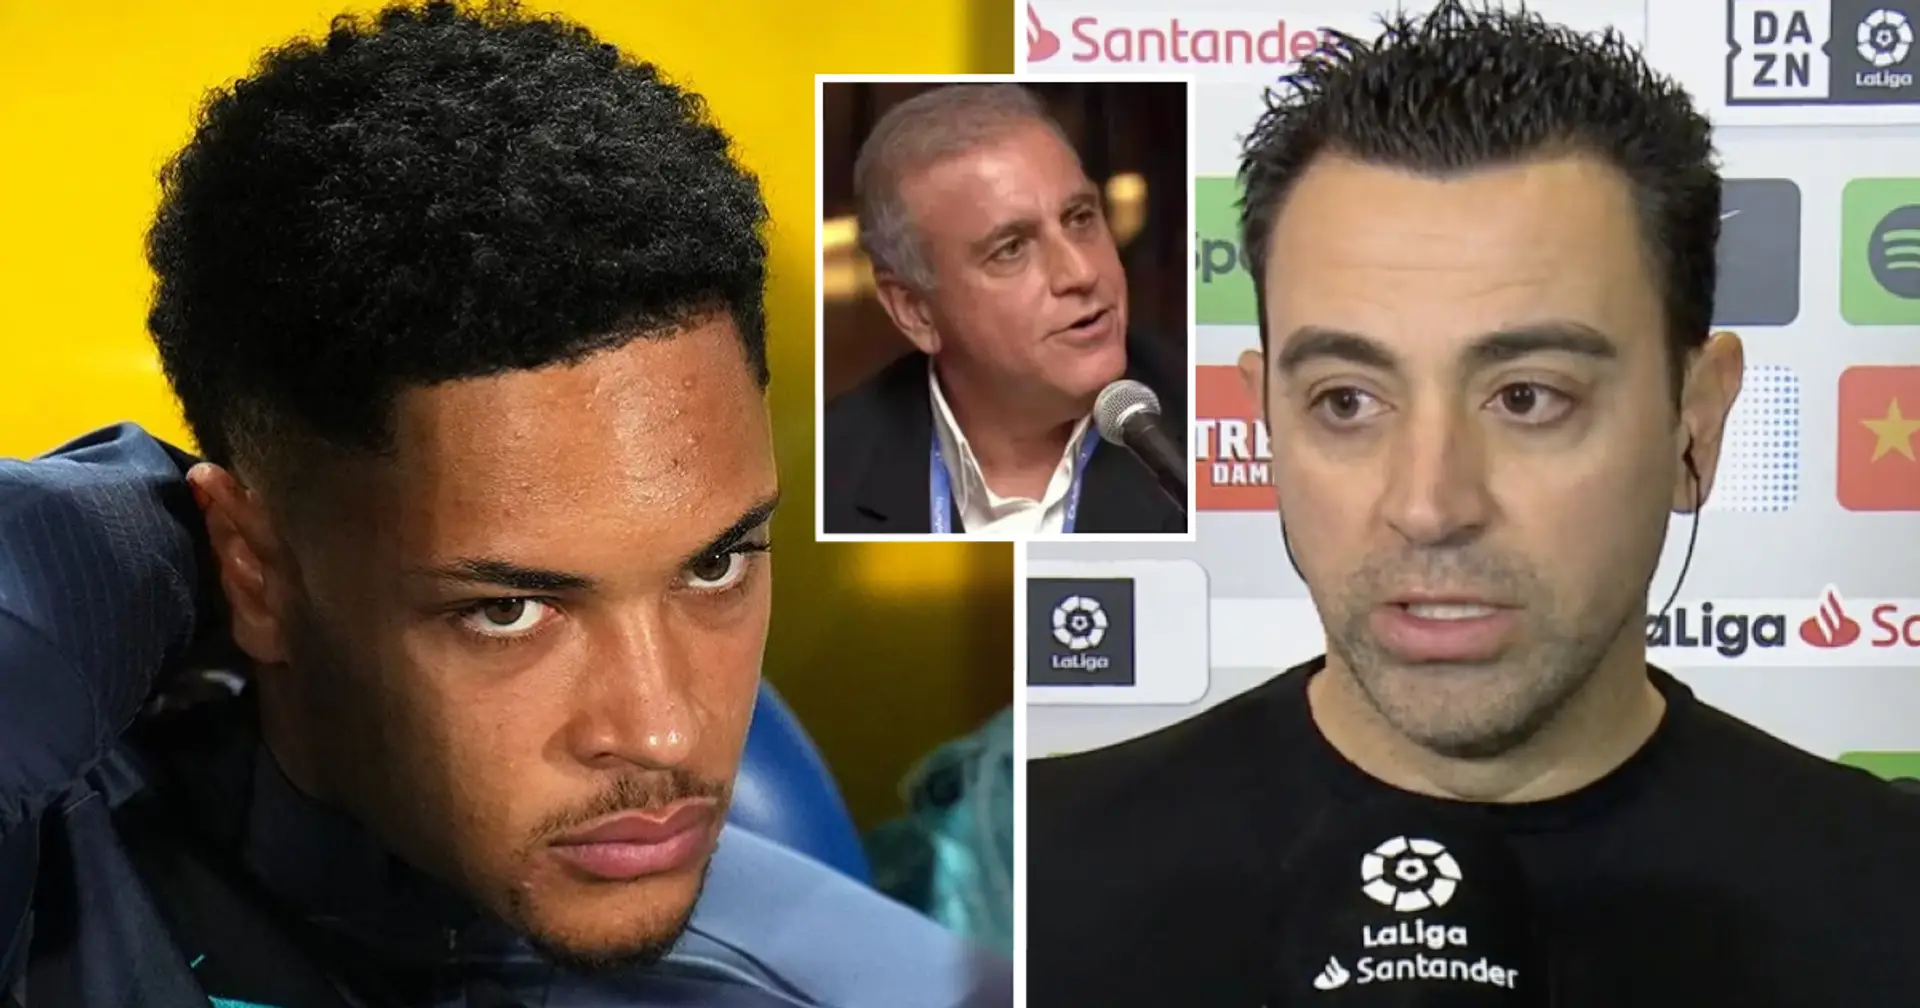 'Here you compete': Xavi fires response to Vitor Roque's agent